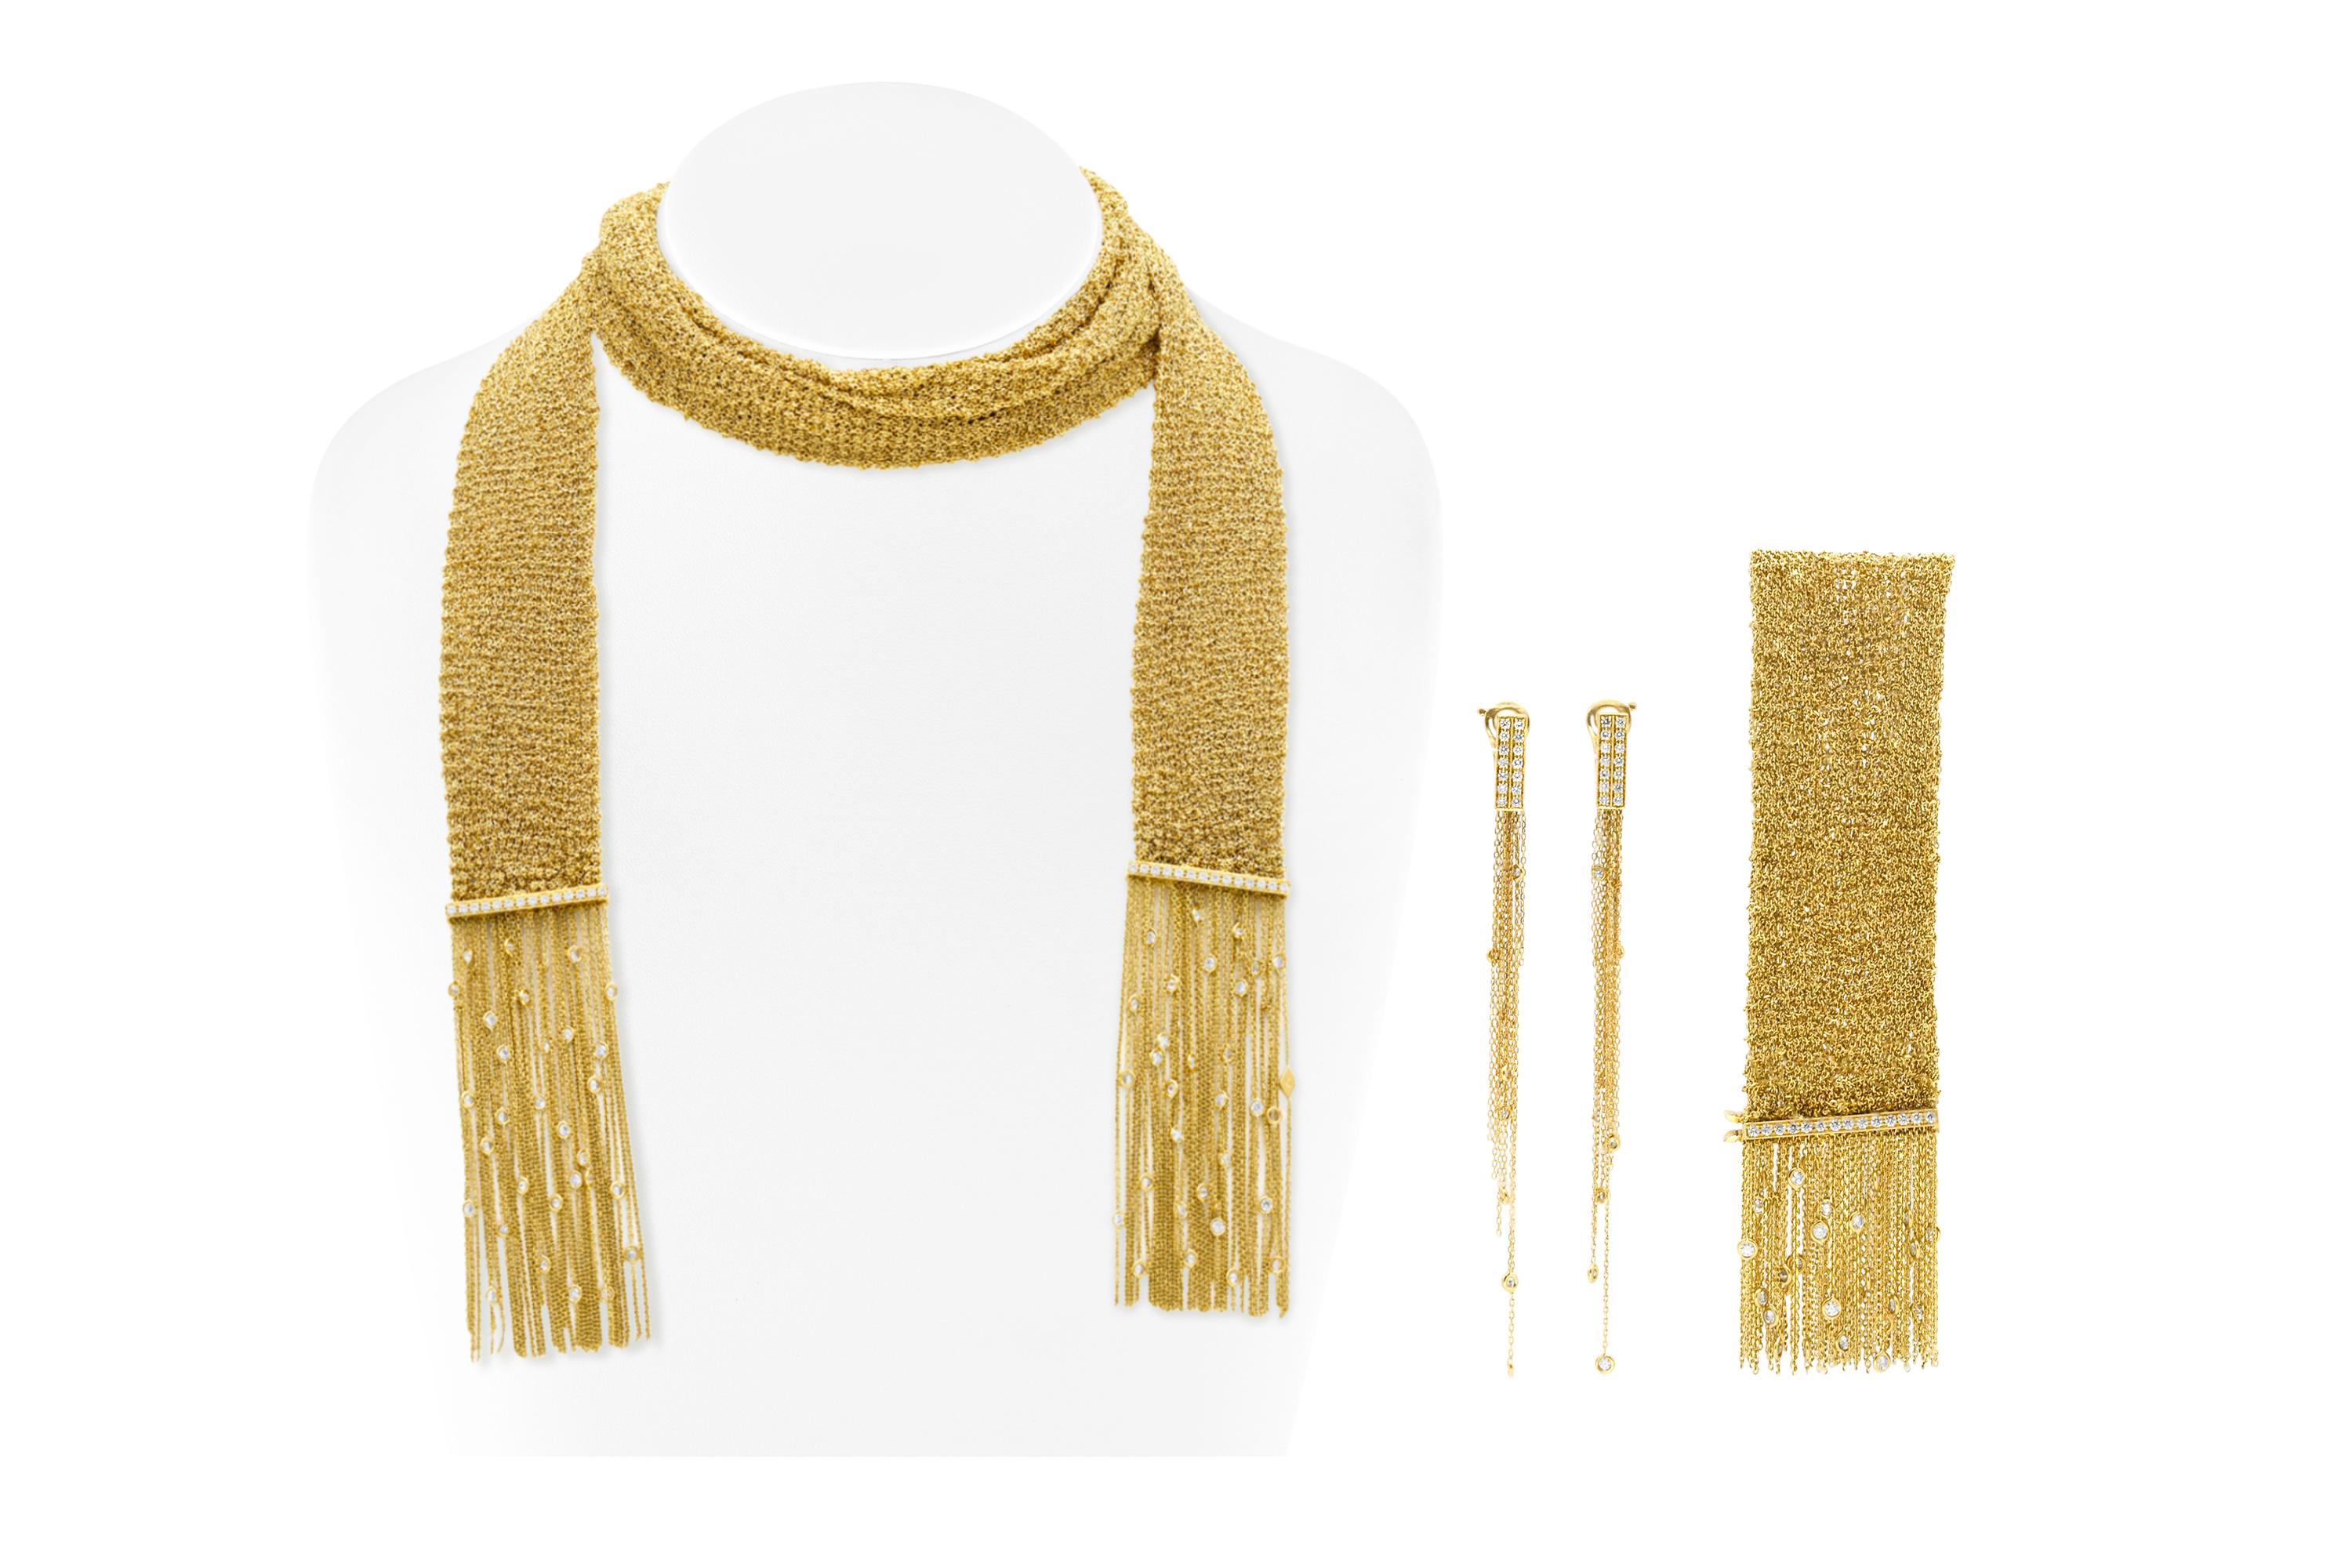 Finely crafted in 18k yellow mesh gold with Round Brilliant cut diamonds on the bars and tassels.
The bracelet measures 7 inches + 1 1/4 inch fringe
The scarf necklace measures 41 1/2 inches + 2 3/4 inch fringe
The earrings measure 4 inches